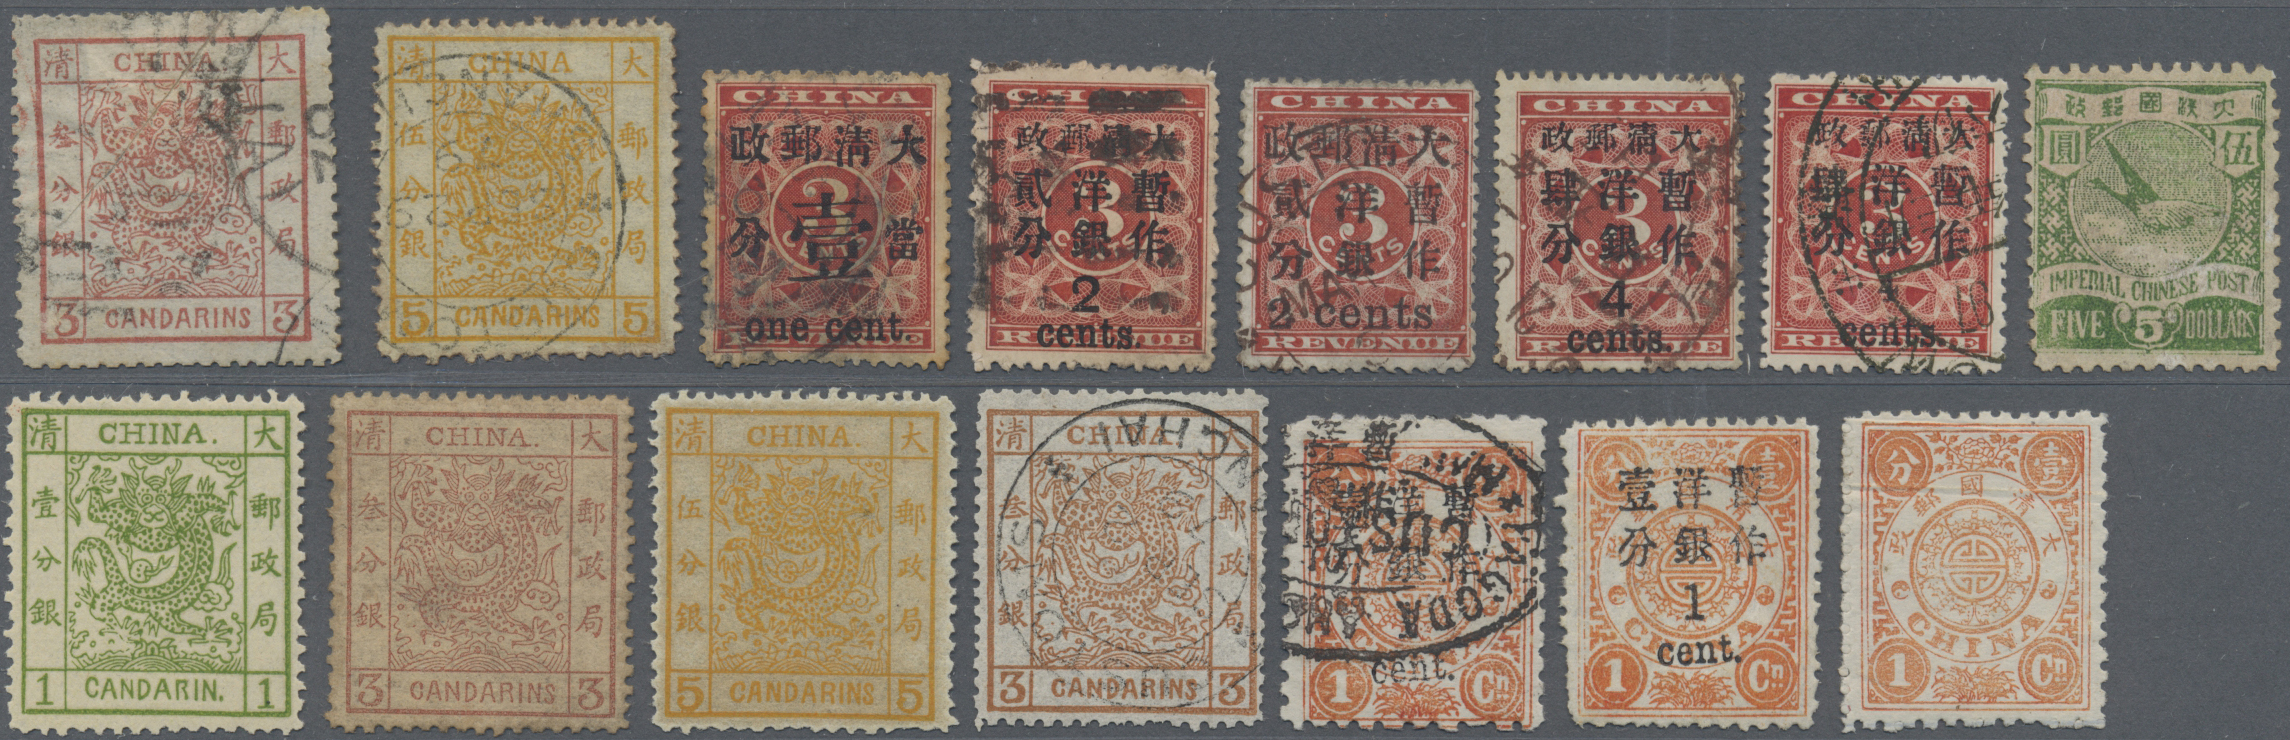 Lot 34579 - China  -  Auktionshaus Christoph Gärtner GmbH & Co. KG Sale #44 Collections Germany